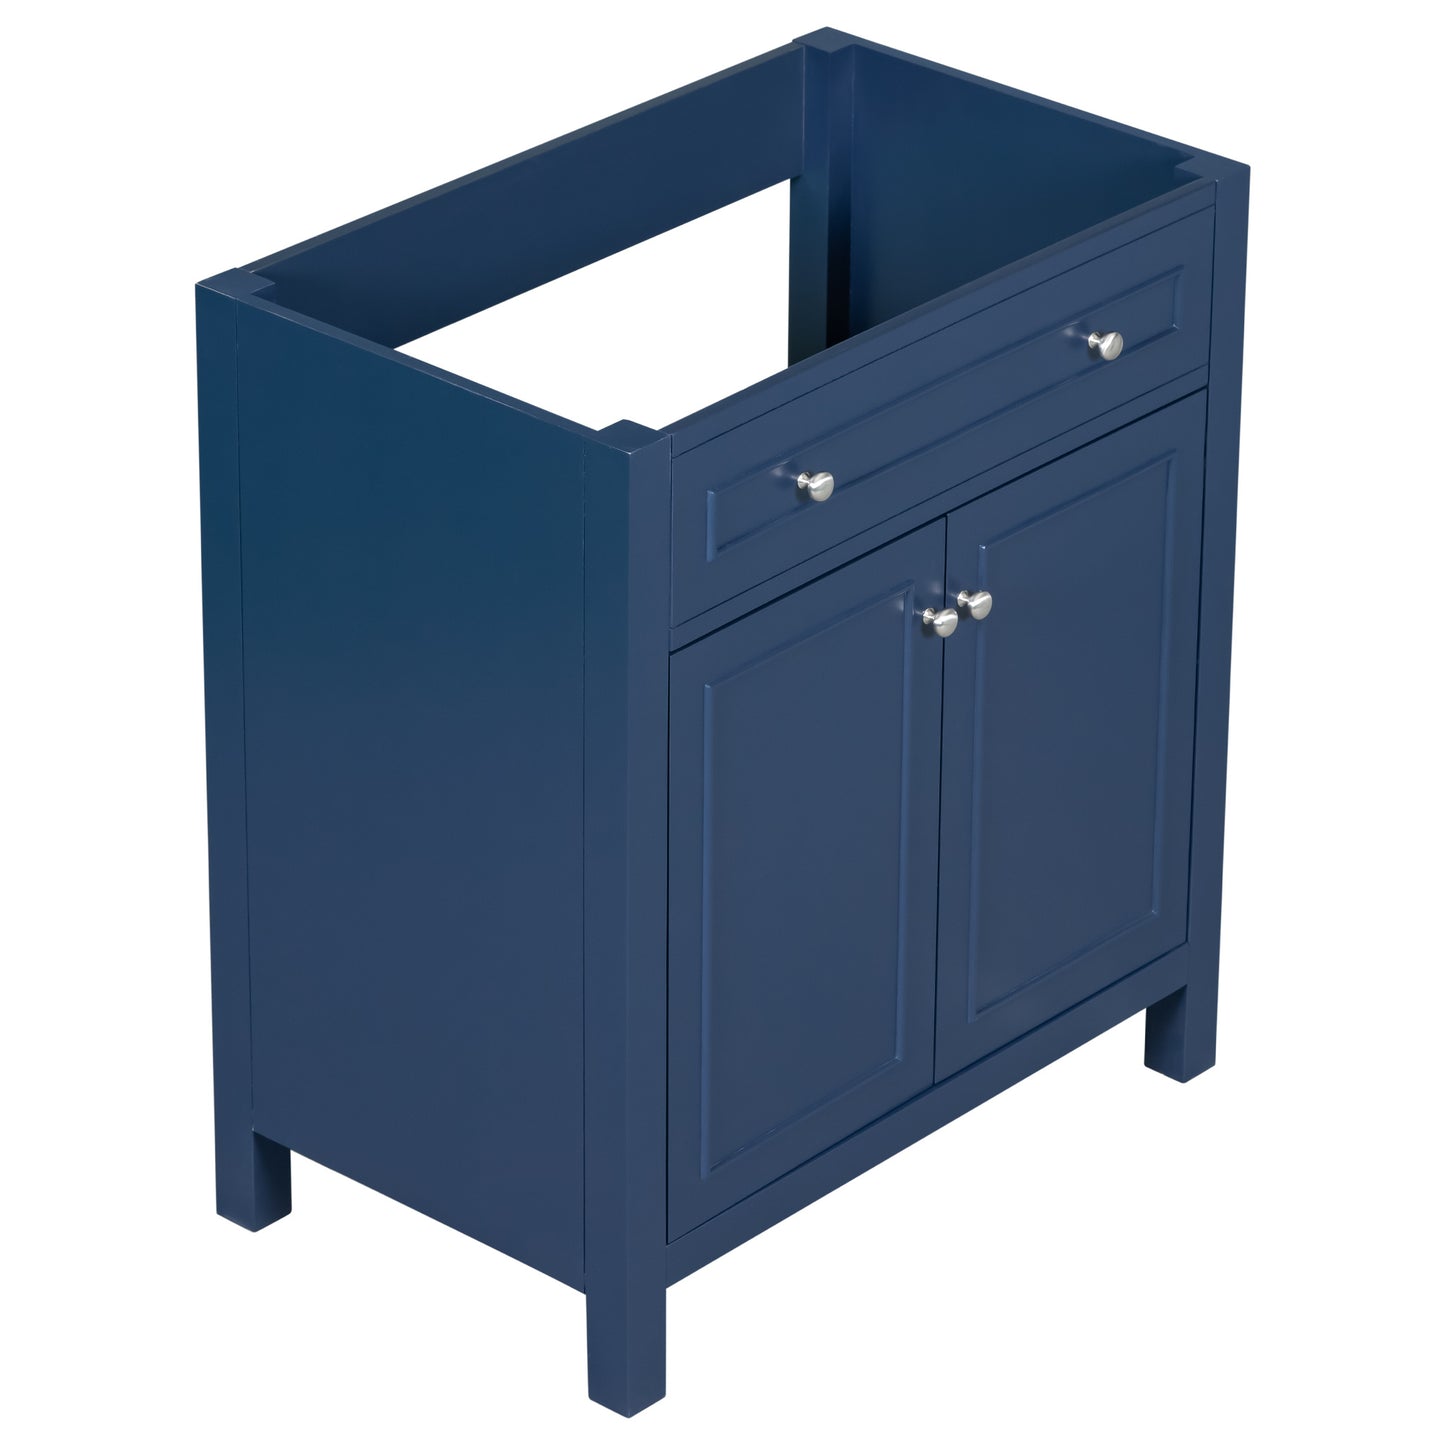 30" Bathroom Vanity without Sink Top, Cabinet Base Only, Bathroom Storage Cabinet with Two Doors and Adjustable Shelf, Blue